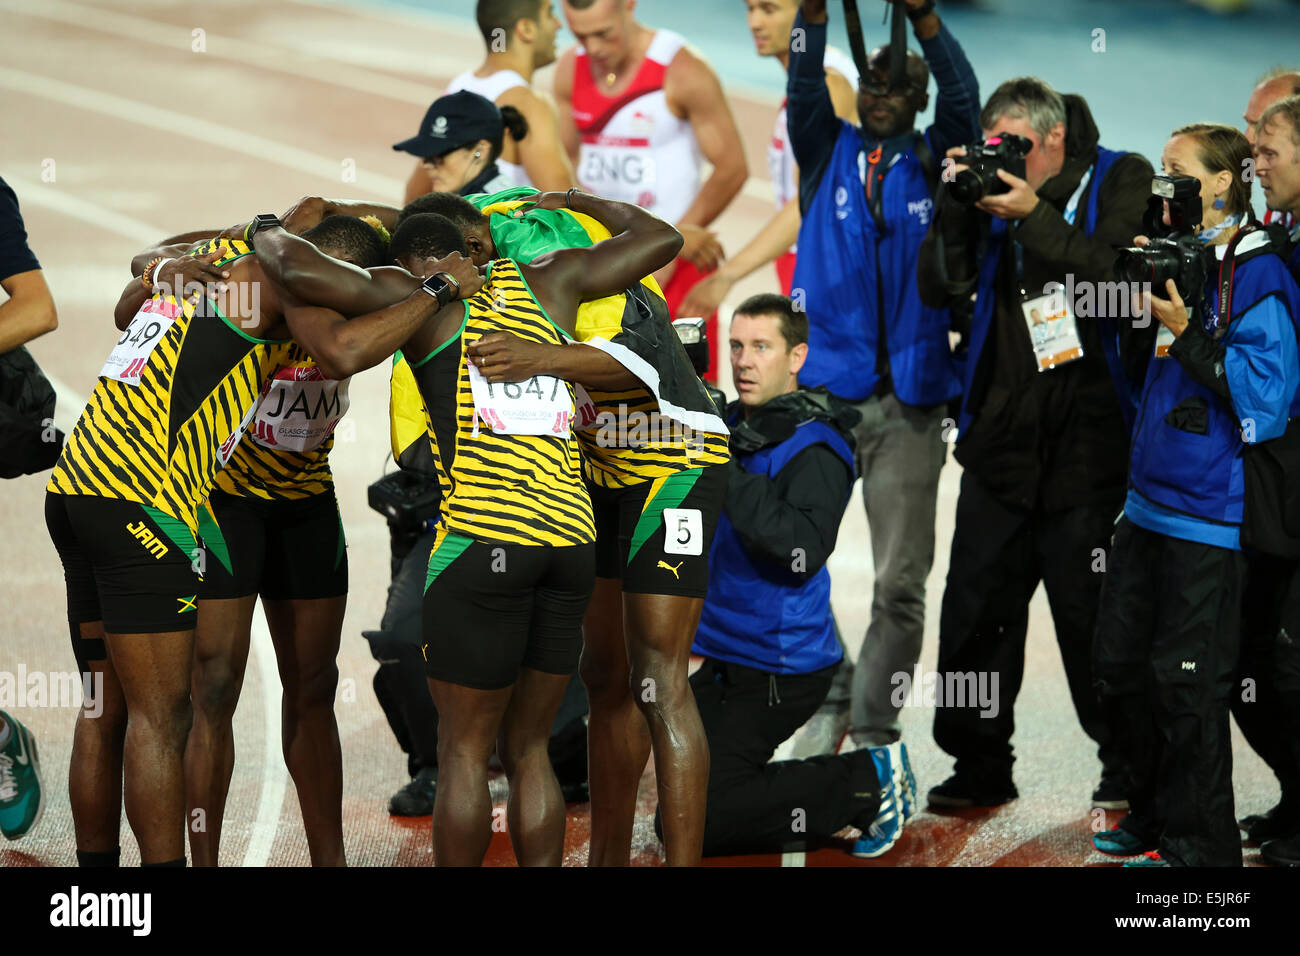 Hampden Park Glasgow 2 August 2014. Commonwealth Games Men's 4x100 final.  Usain Bolt brings home the baton for Jamaica in a new Games record time of 37.58.  England finished second in 38.02. Jamaican team - Jason Livermore; Kemar Bailey-Cole; Nickel Ashmeade and Usain Bolt. A team huddle for the cameras. Stock Photo